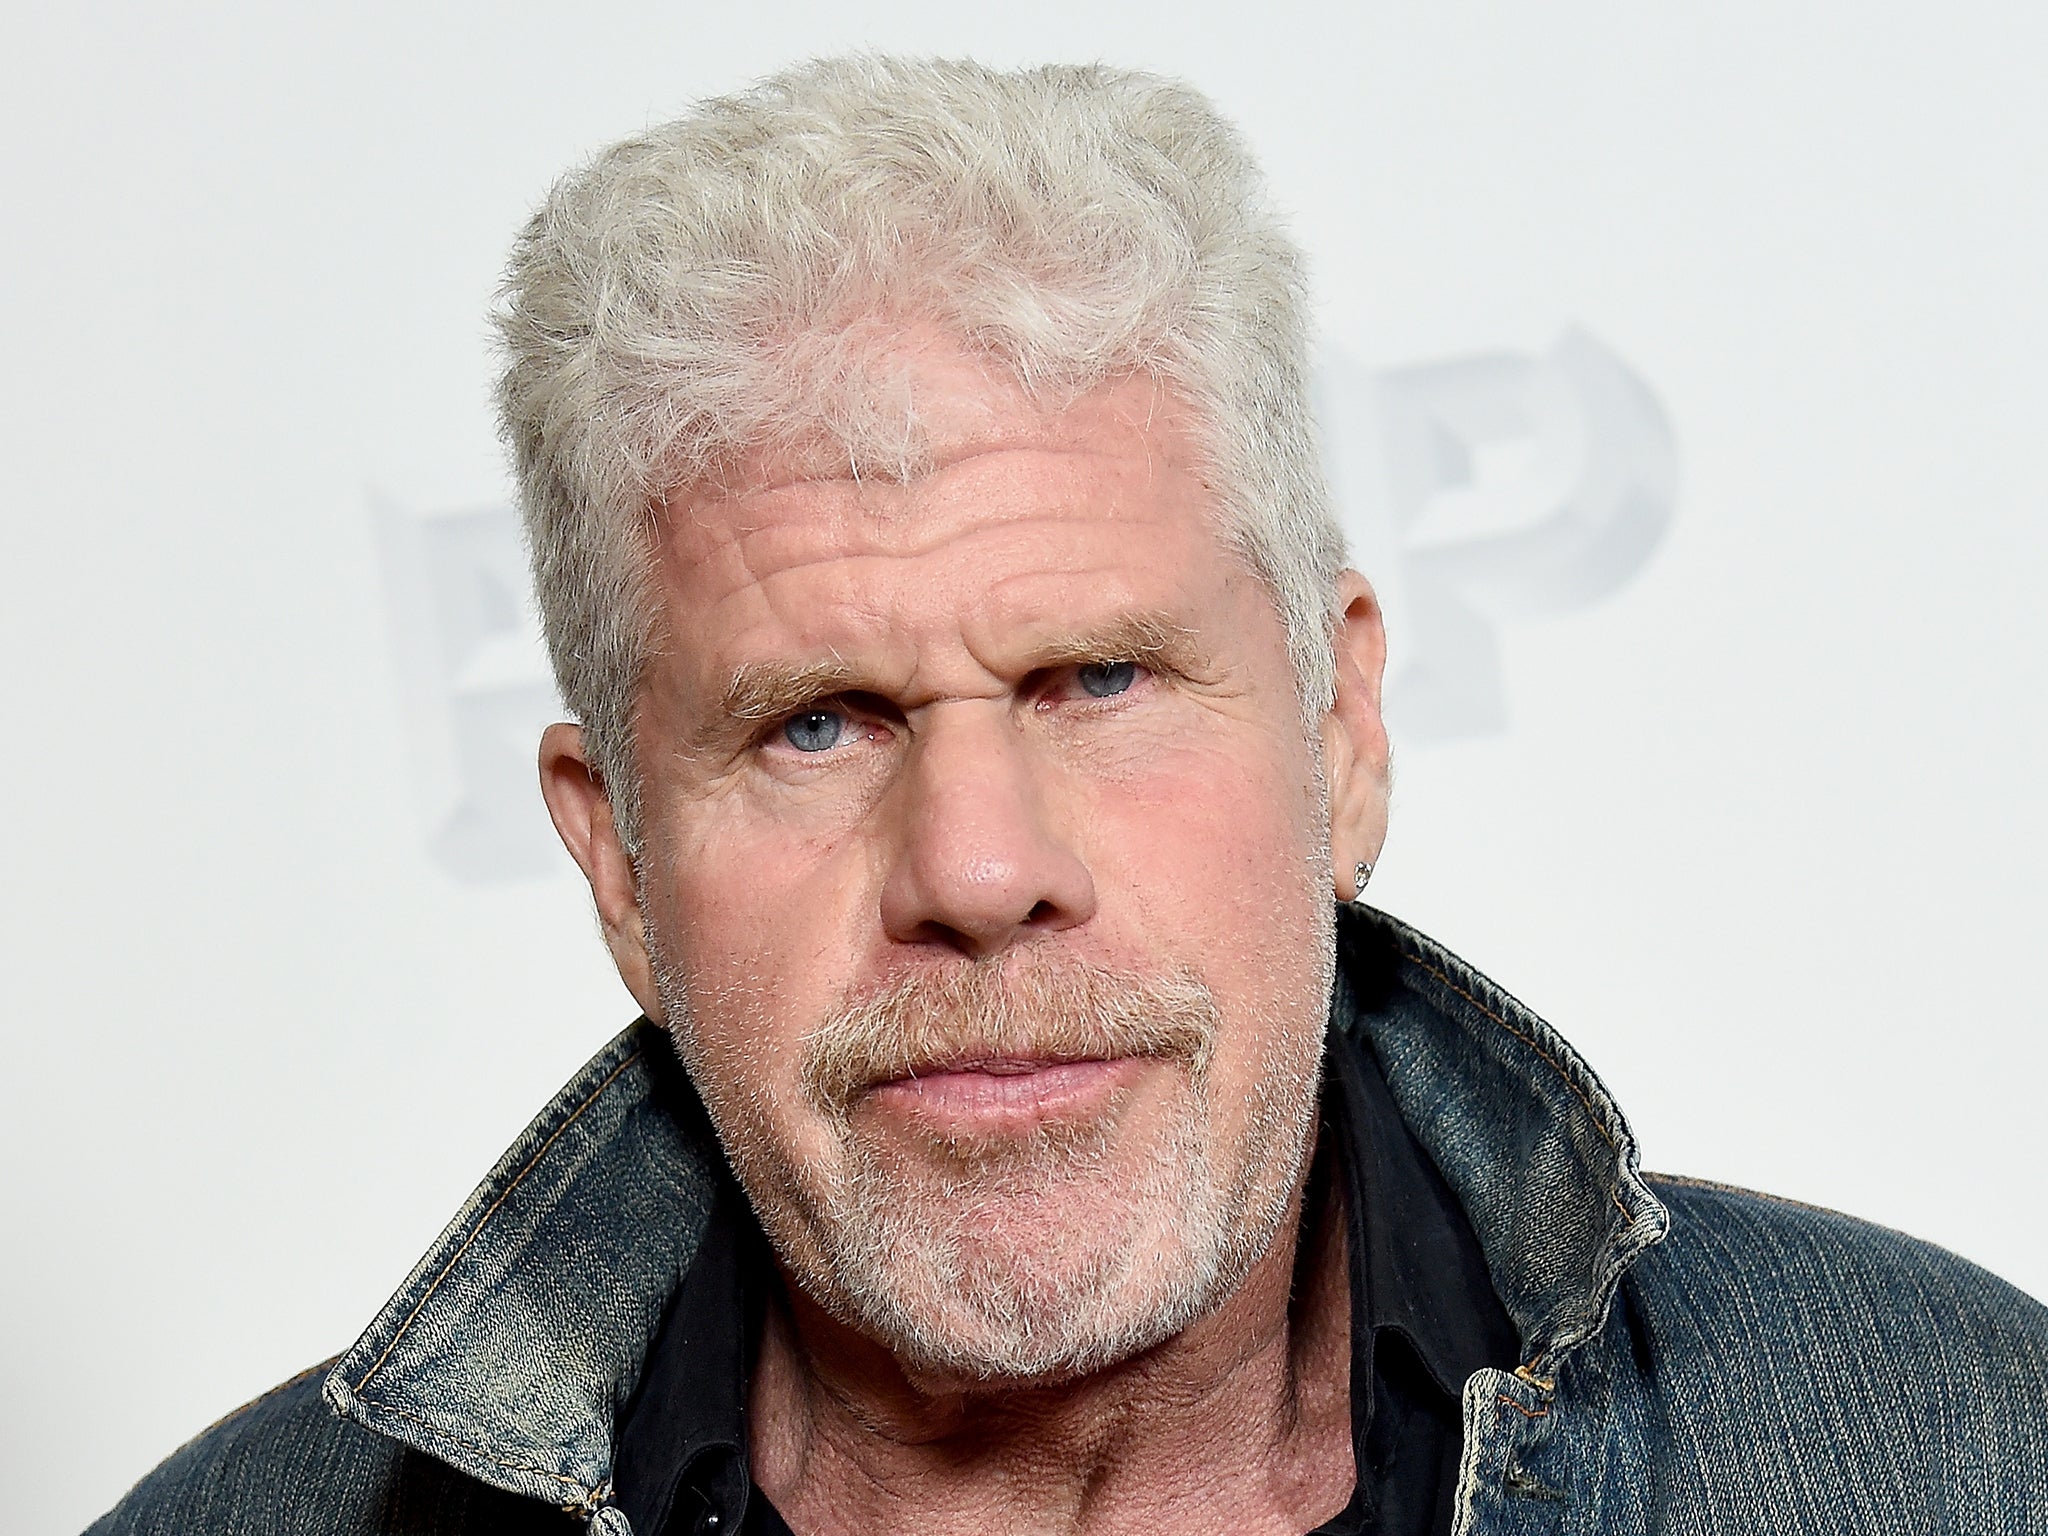 Ron Perlman: ‘I hope there’s a special place in hell for people who have exploited others’ vulnerability’